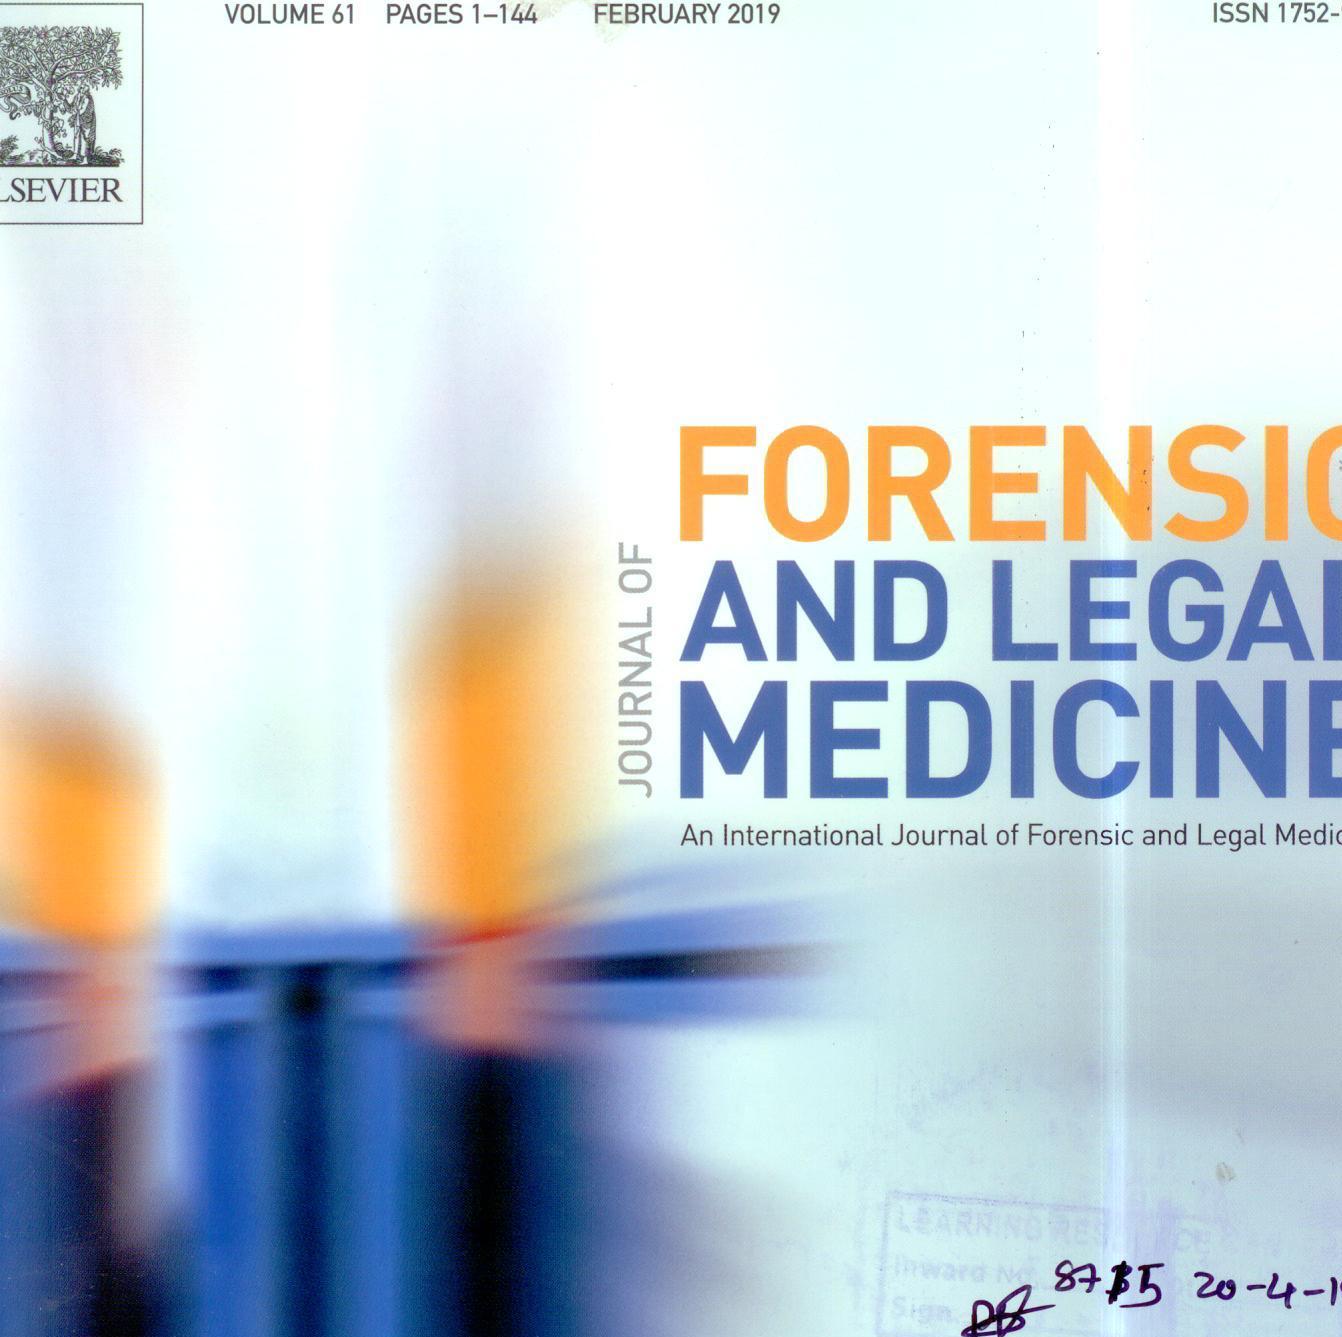 https://www.sciencedirect.com/journal/journal-of-forensic-and-legal-medicine/vol/62/suppl/C